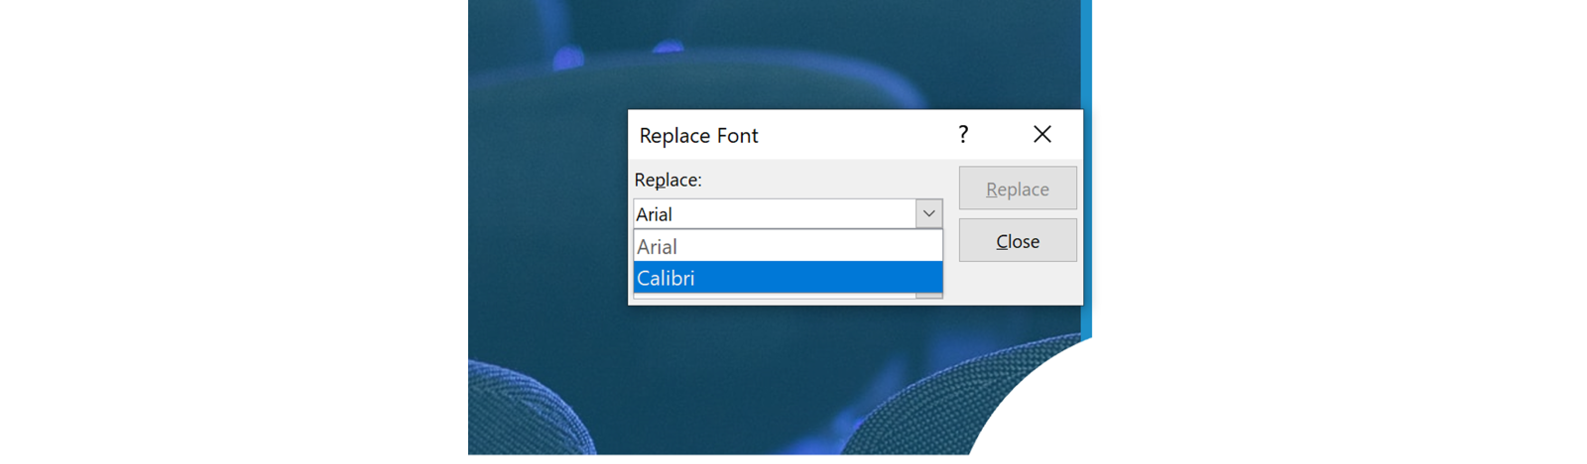 find and replace fonts in powerpoint 2010 for mac